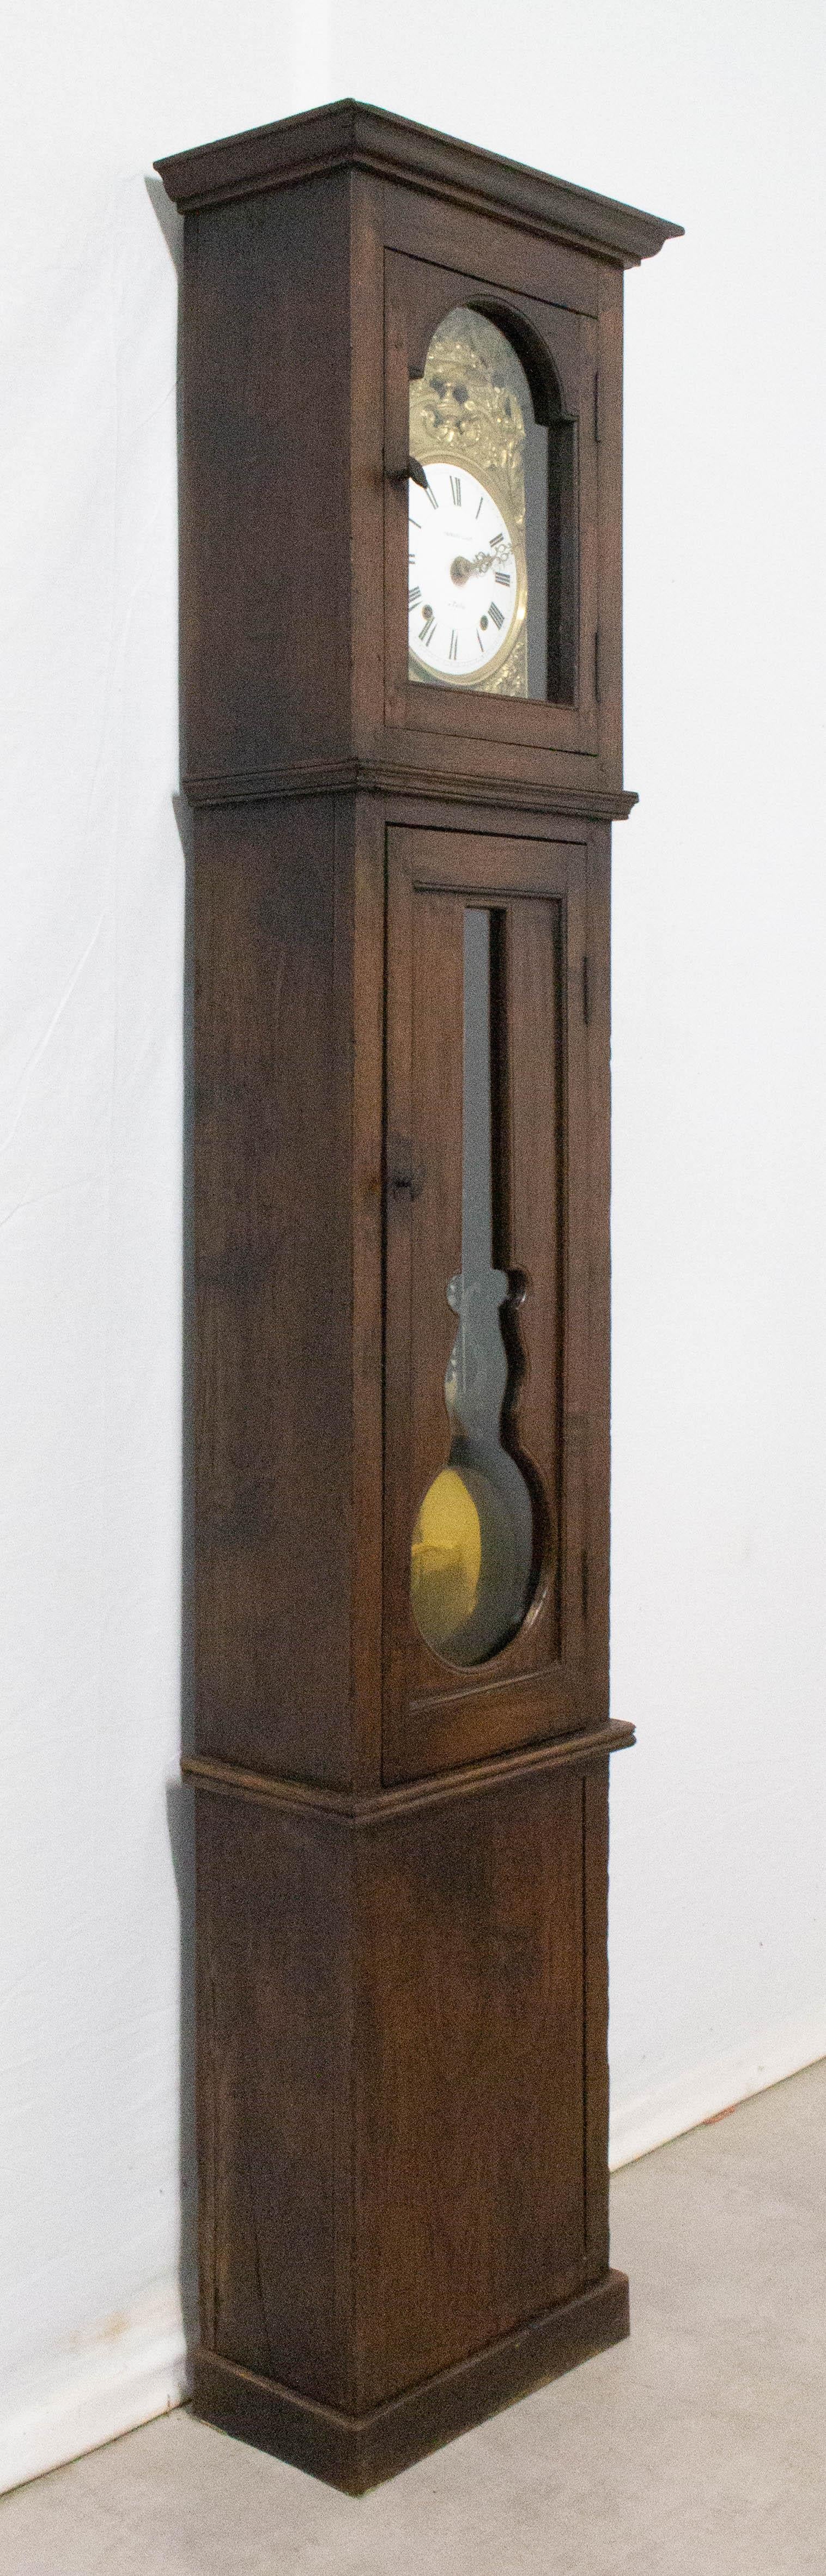 Grandfather clock or Comtoise from South of Bordeaux, France, Empire, 19th century.
Oak
Good antique condition, the clock is working with a nice and clear sound.

For shipping:
225 x 24 x 45.5 cm 30kg.